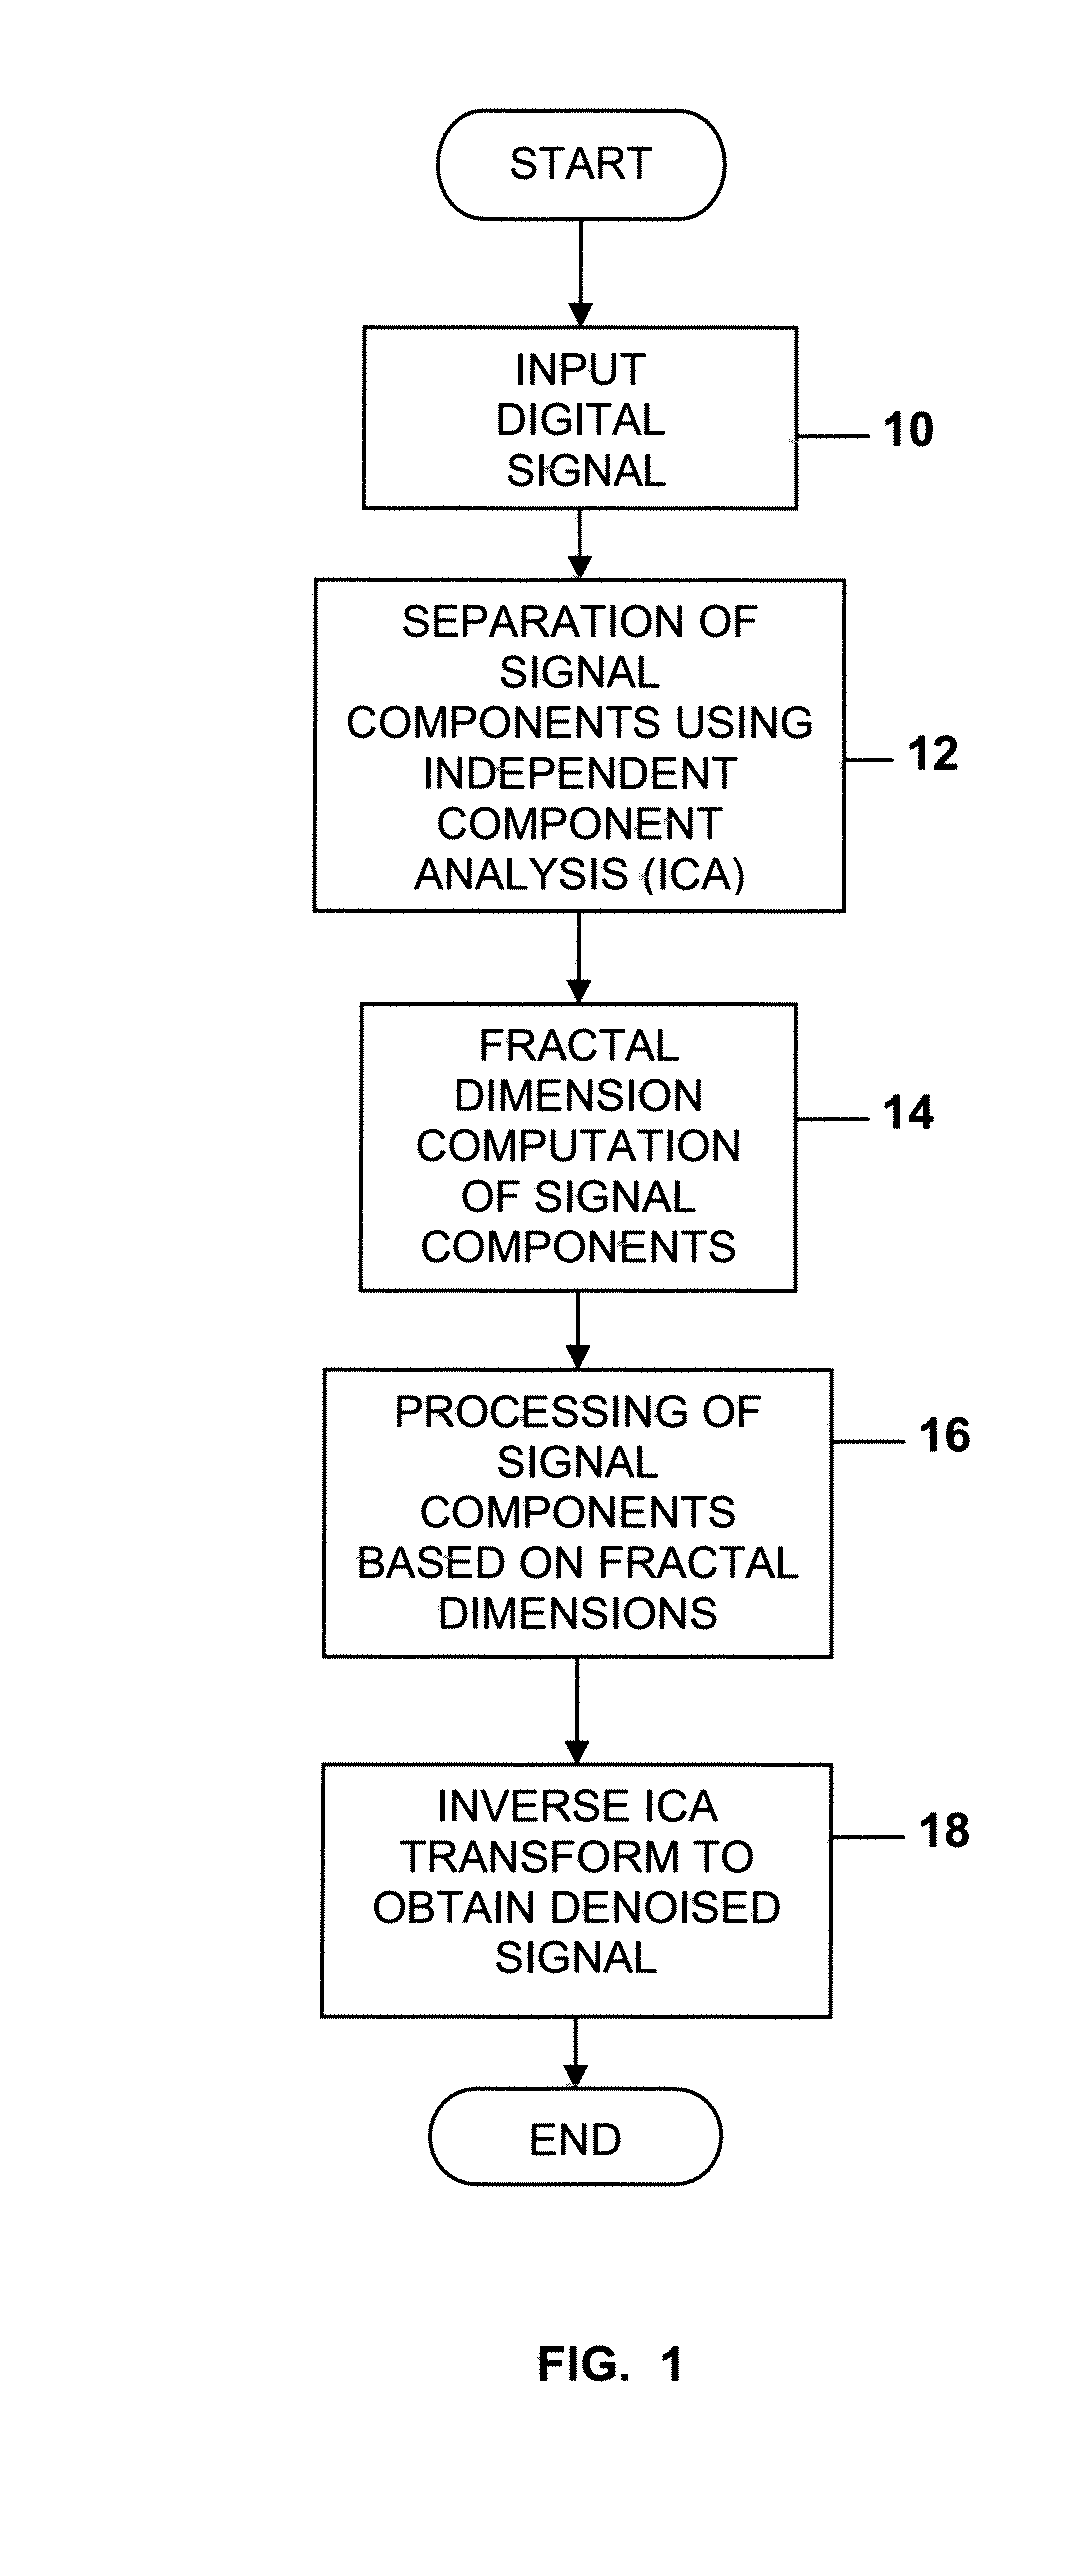 System and Method For Signal Denoising Using Independent Component Analysis and Fractal Dimension Estimation